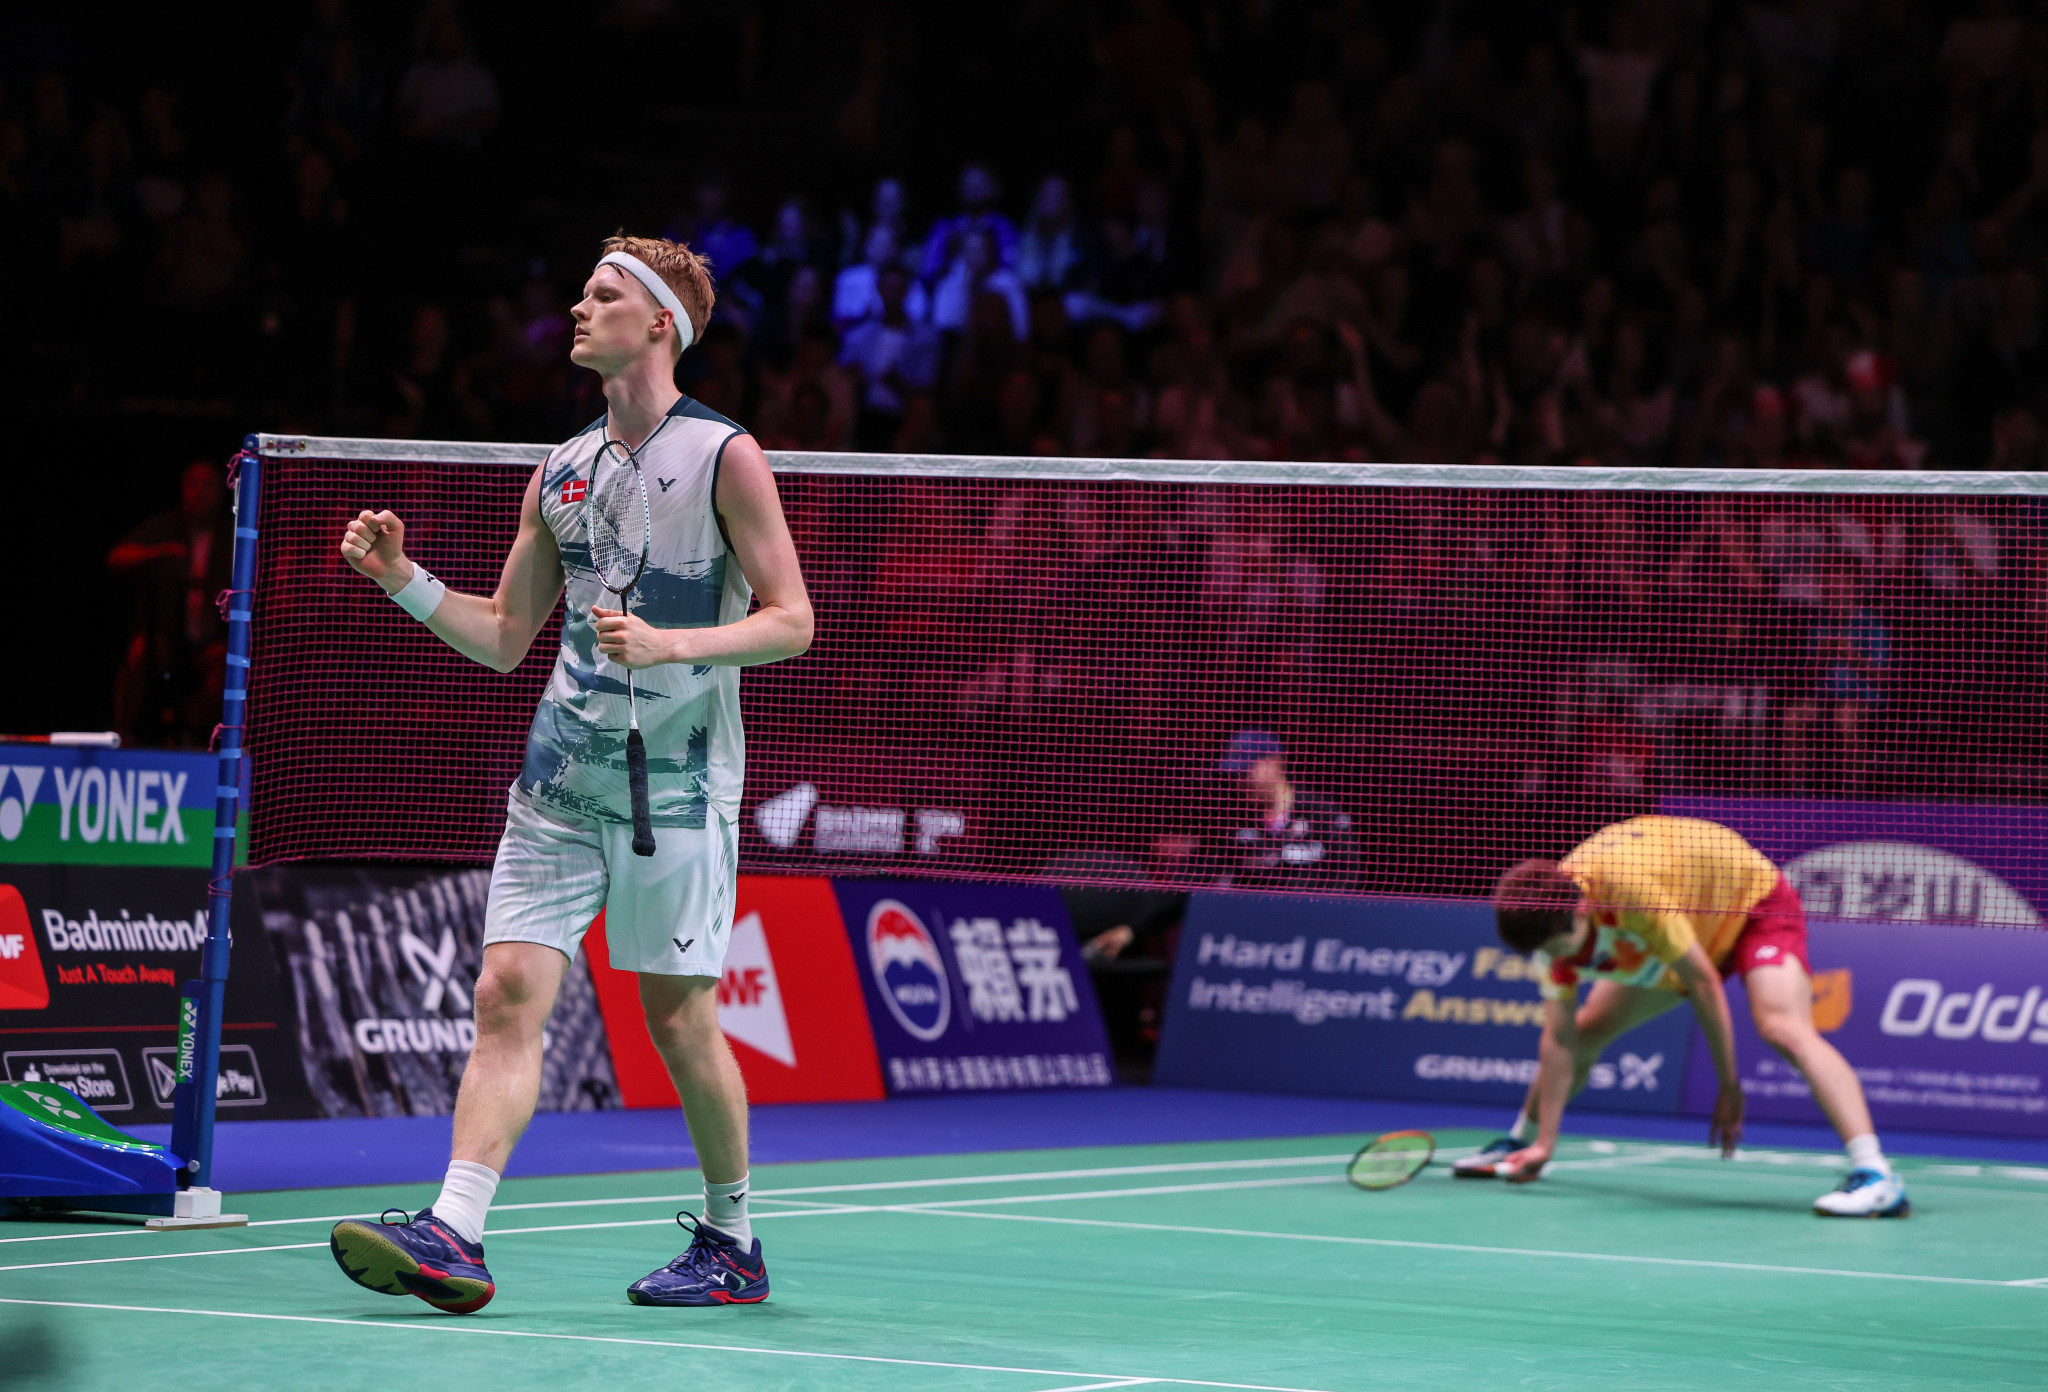 Antonsen digs deep to prevail but Danish trio lose at BWF World Championships